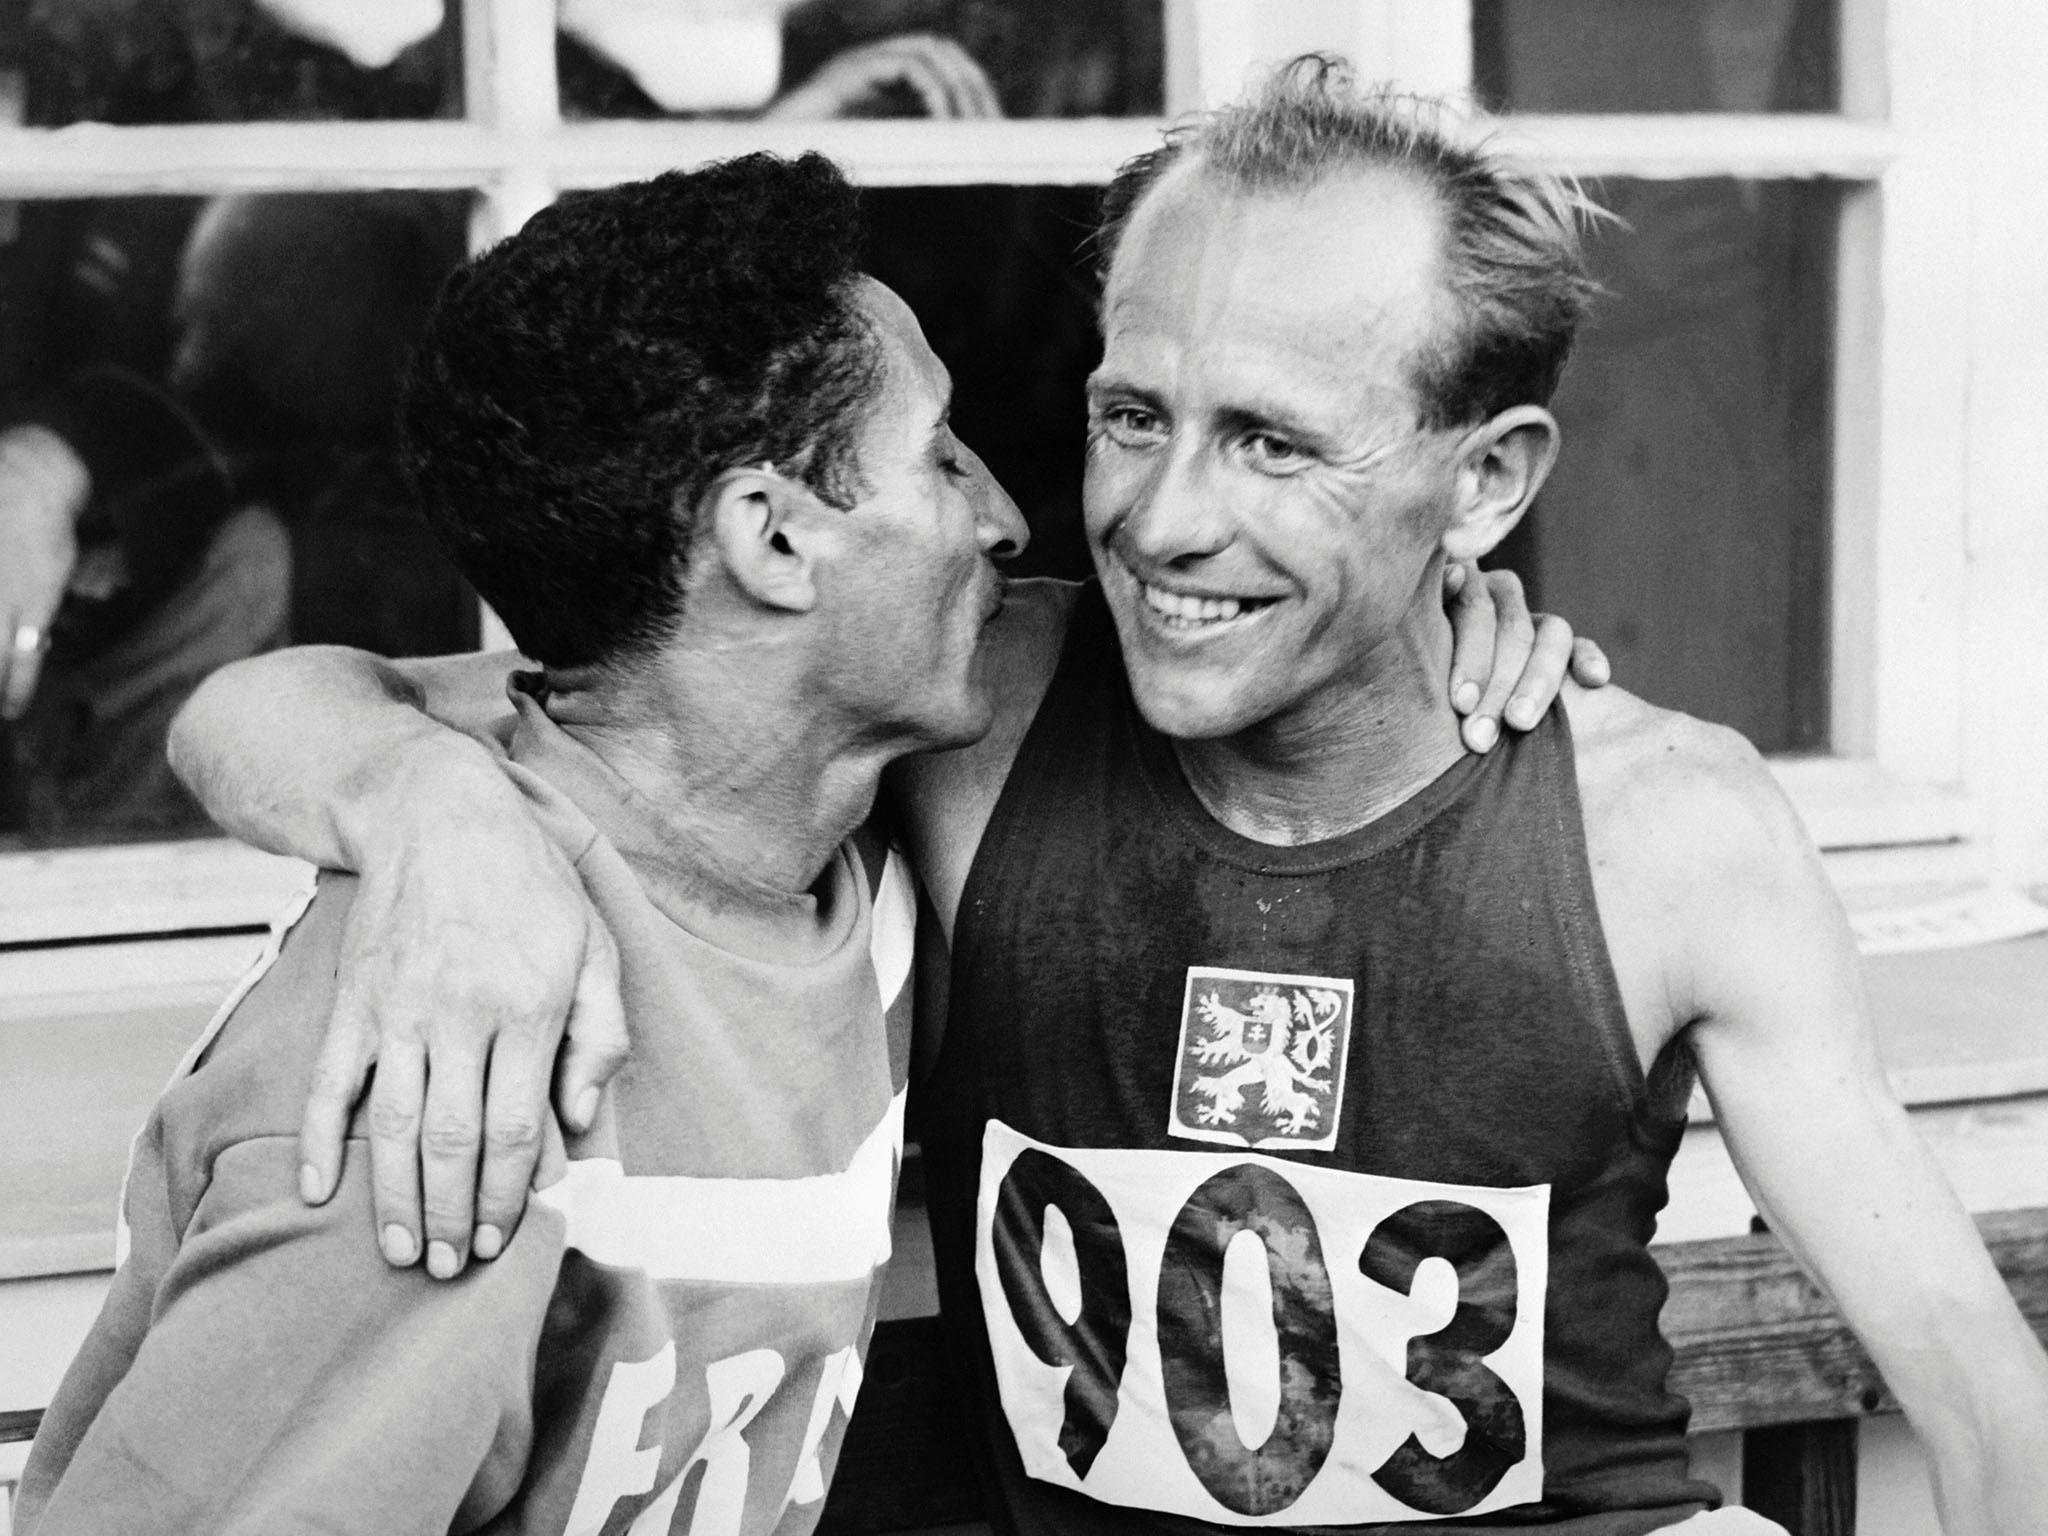 Emil Zatopek (right) is congratulated by Alain Mimoun after the 5000m in Helsinki